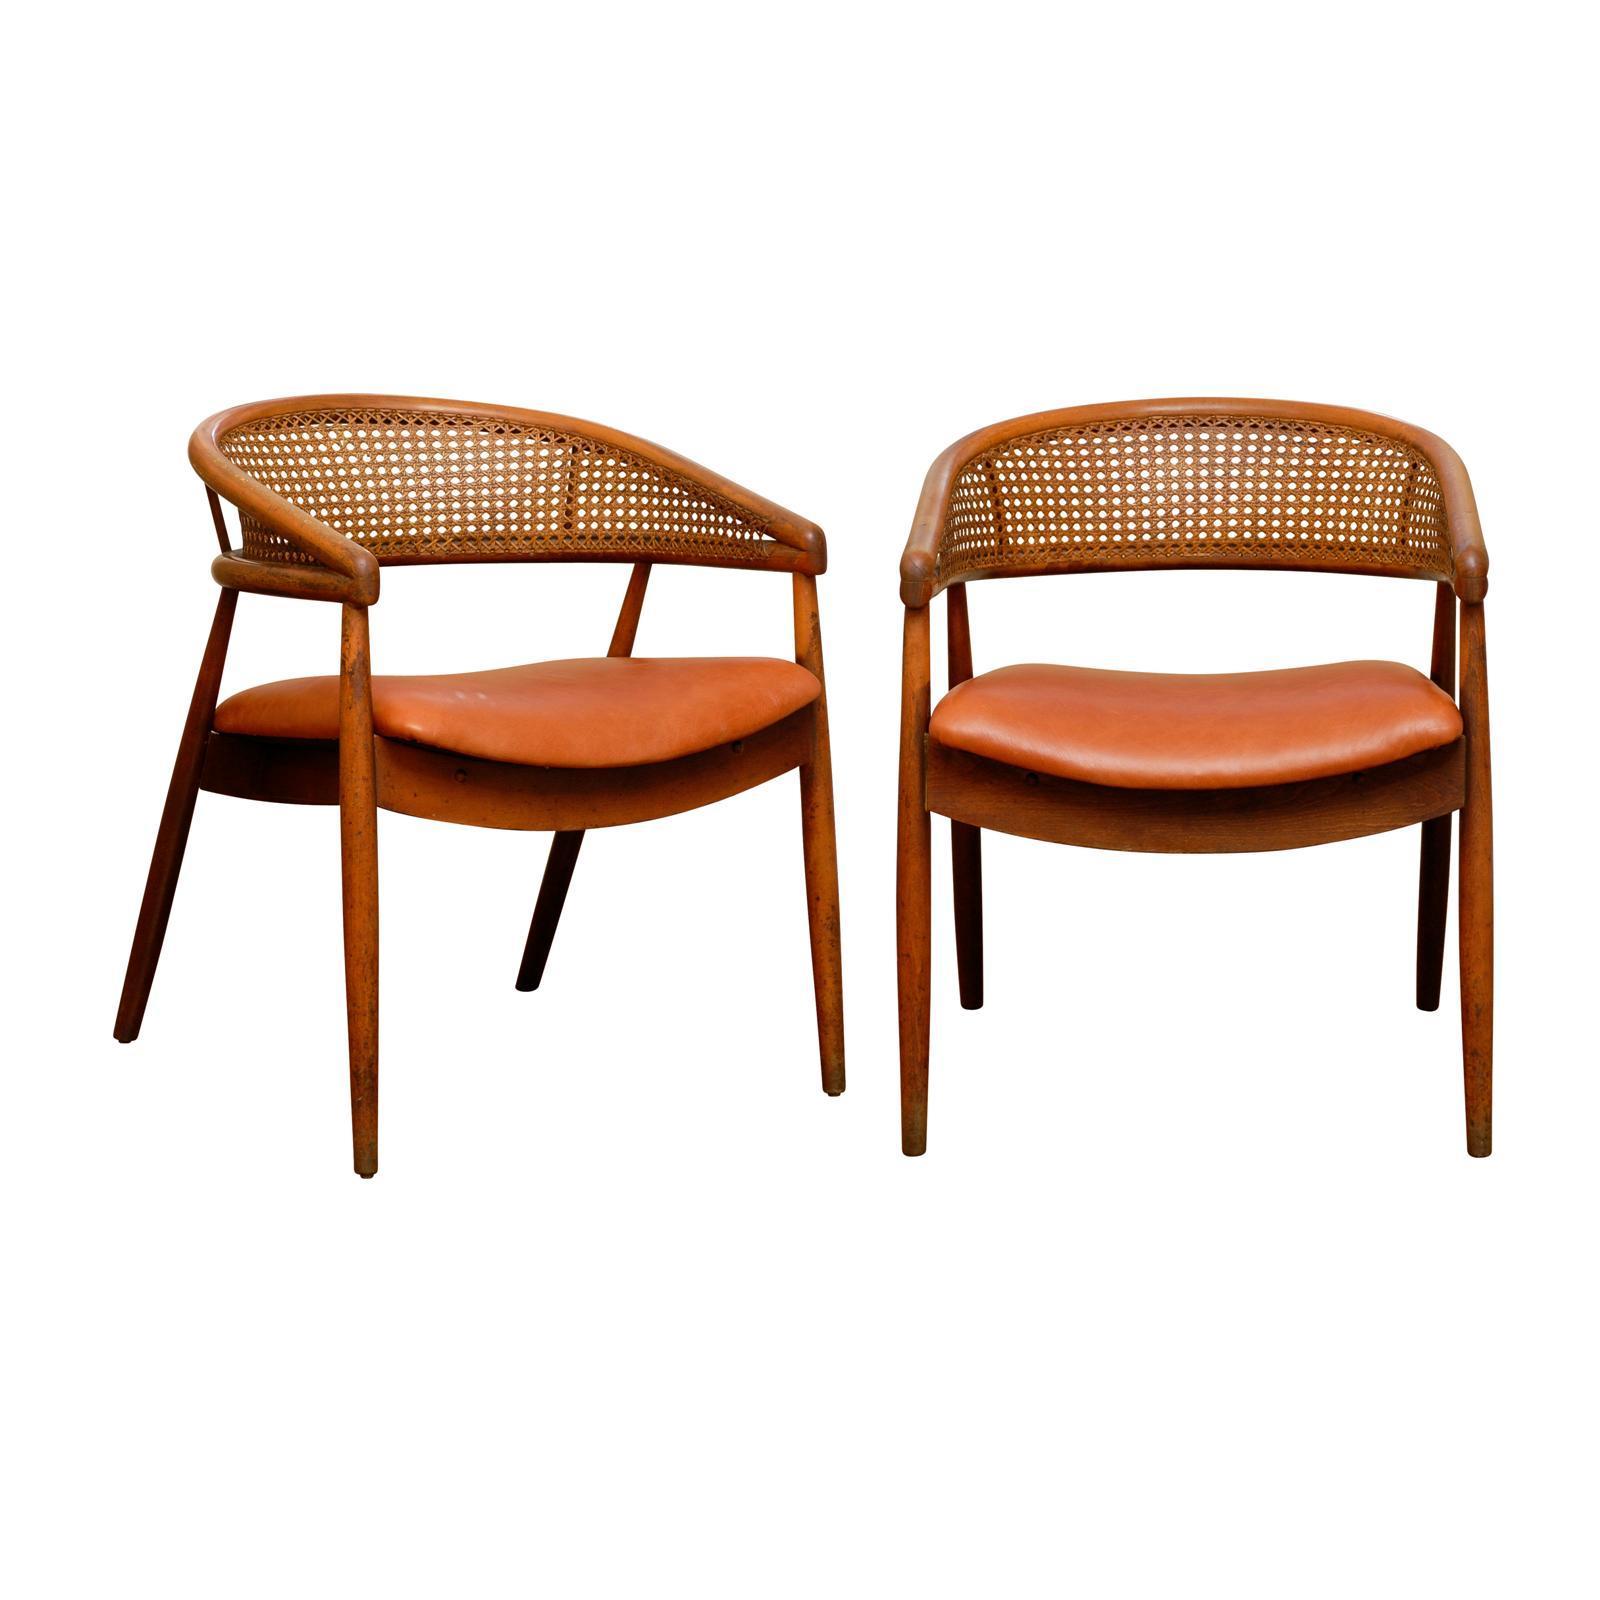 Rare Pair of James Mont Style Bent Beech and Cane Arm Chairs